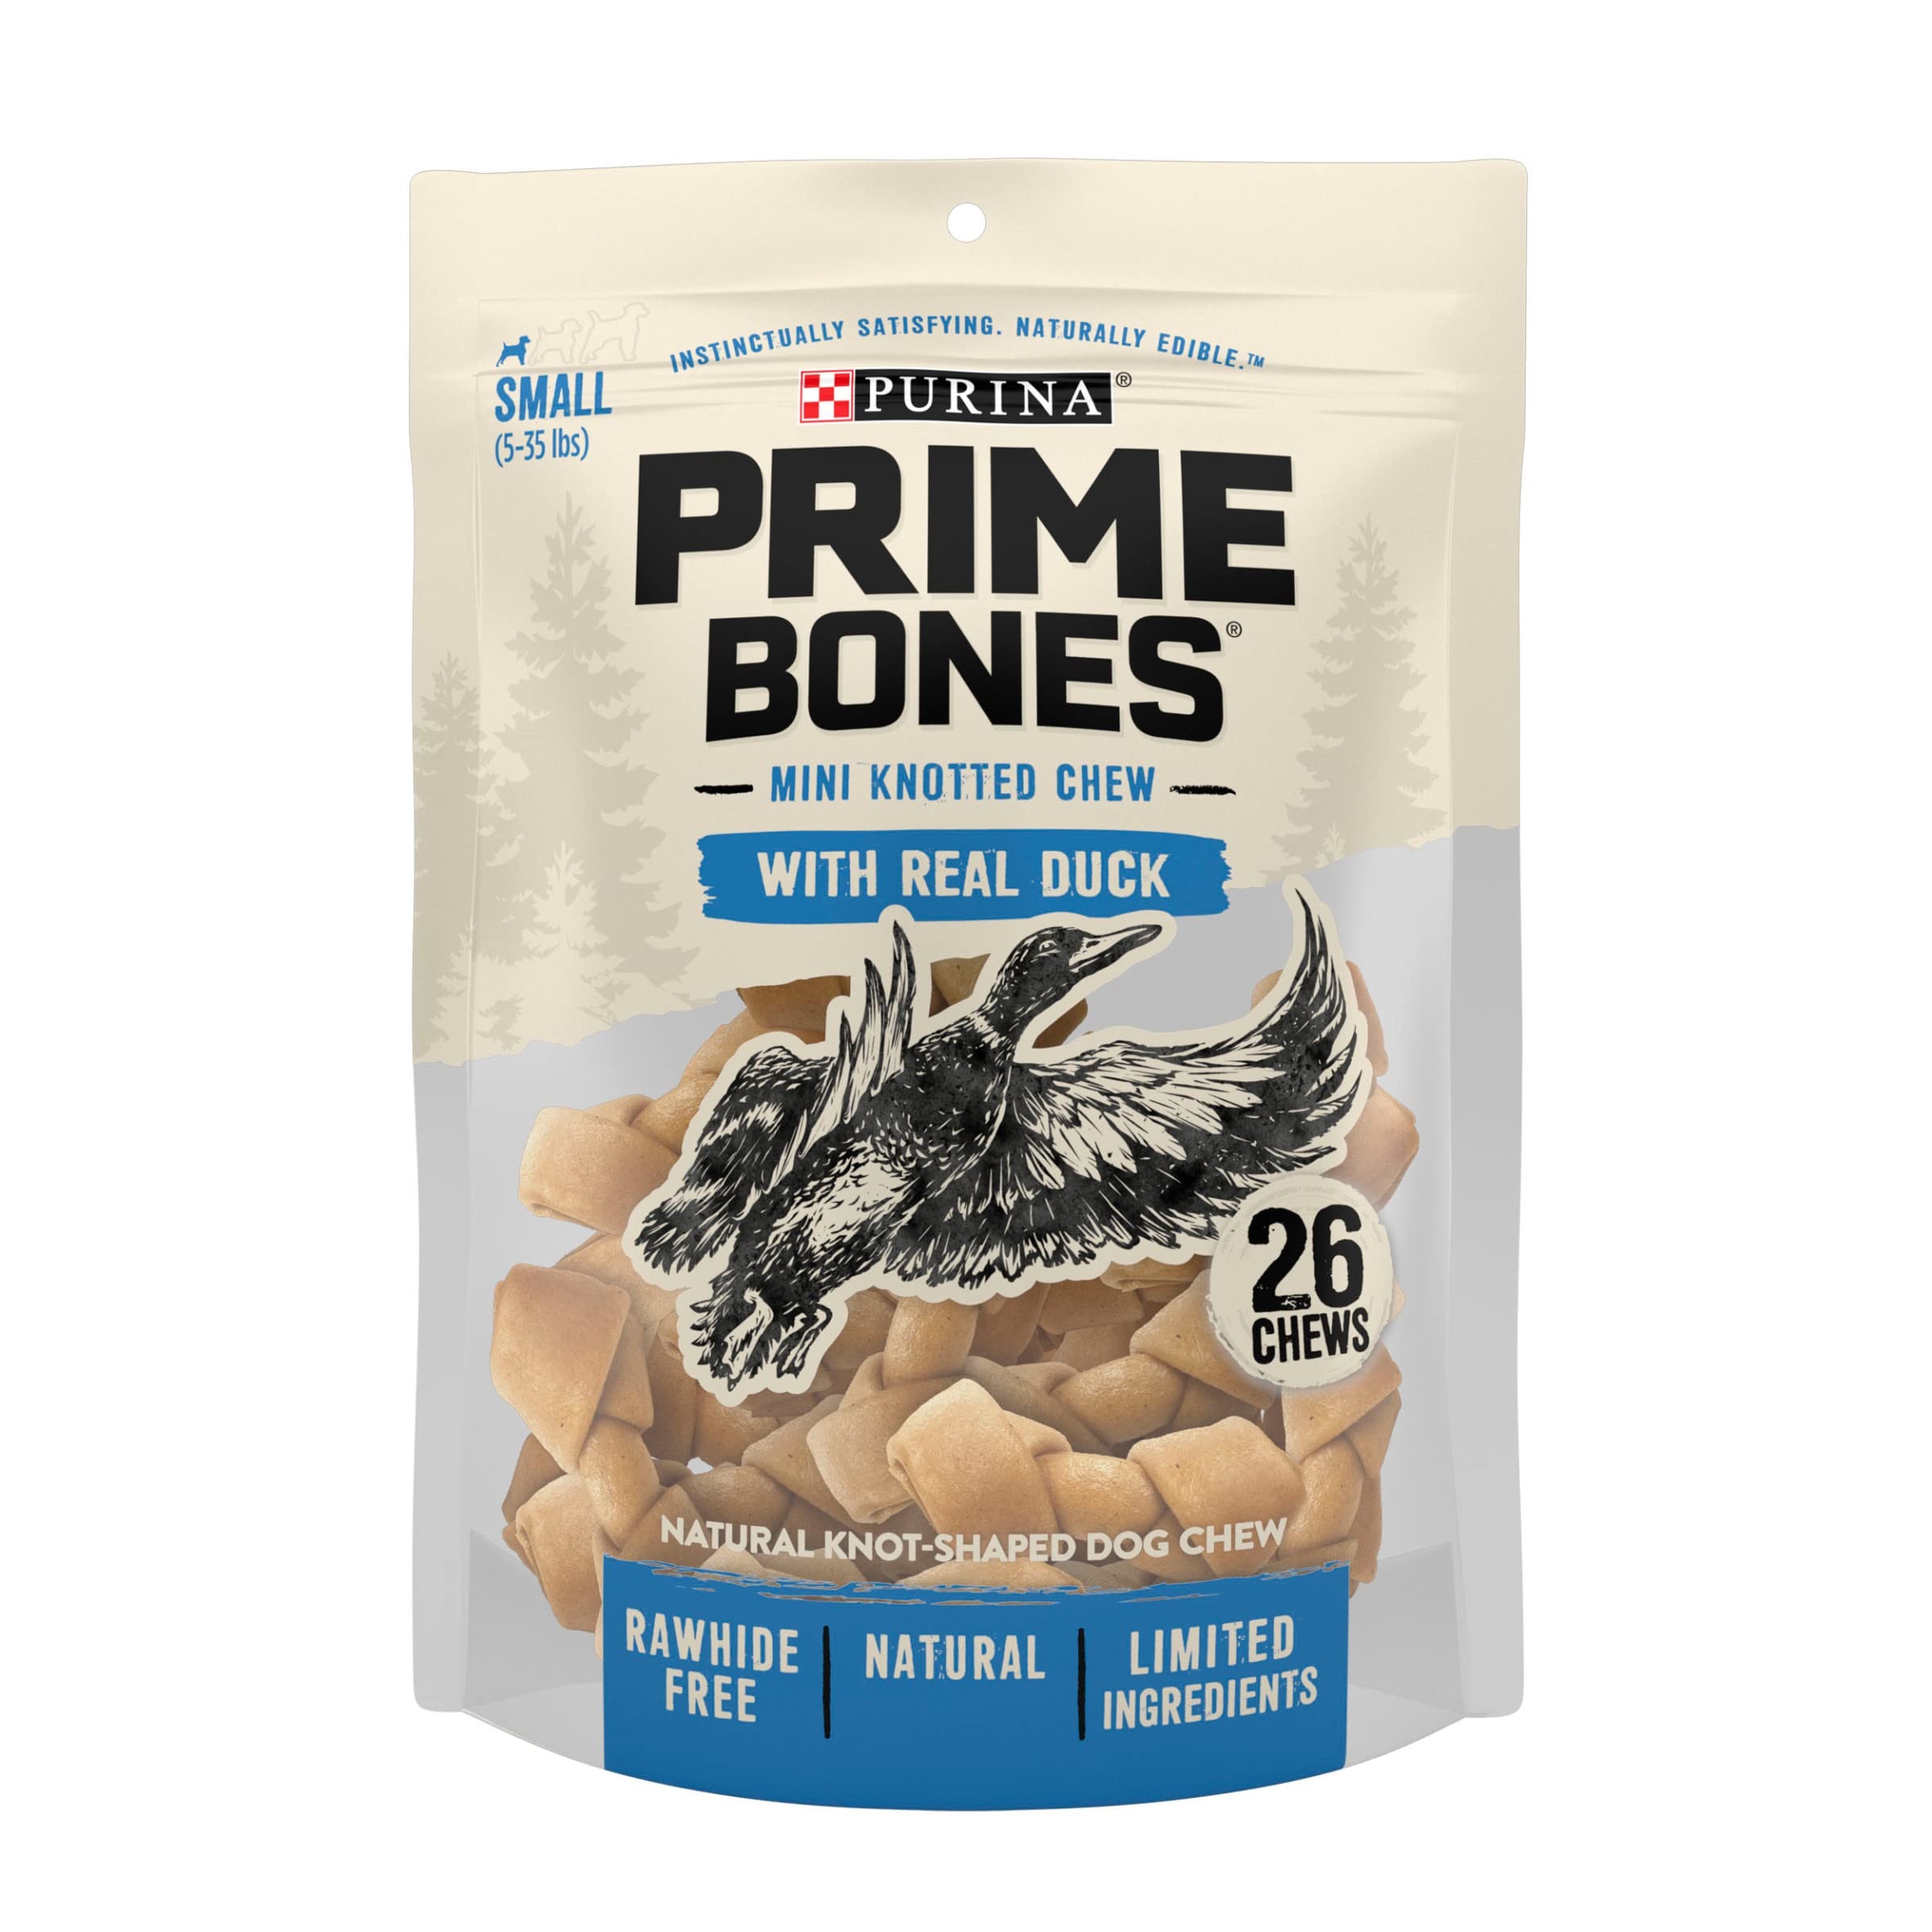 SAVE $2.00 on ONE (1) Prime Bones Mini Knotted Chew Dog Treats